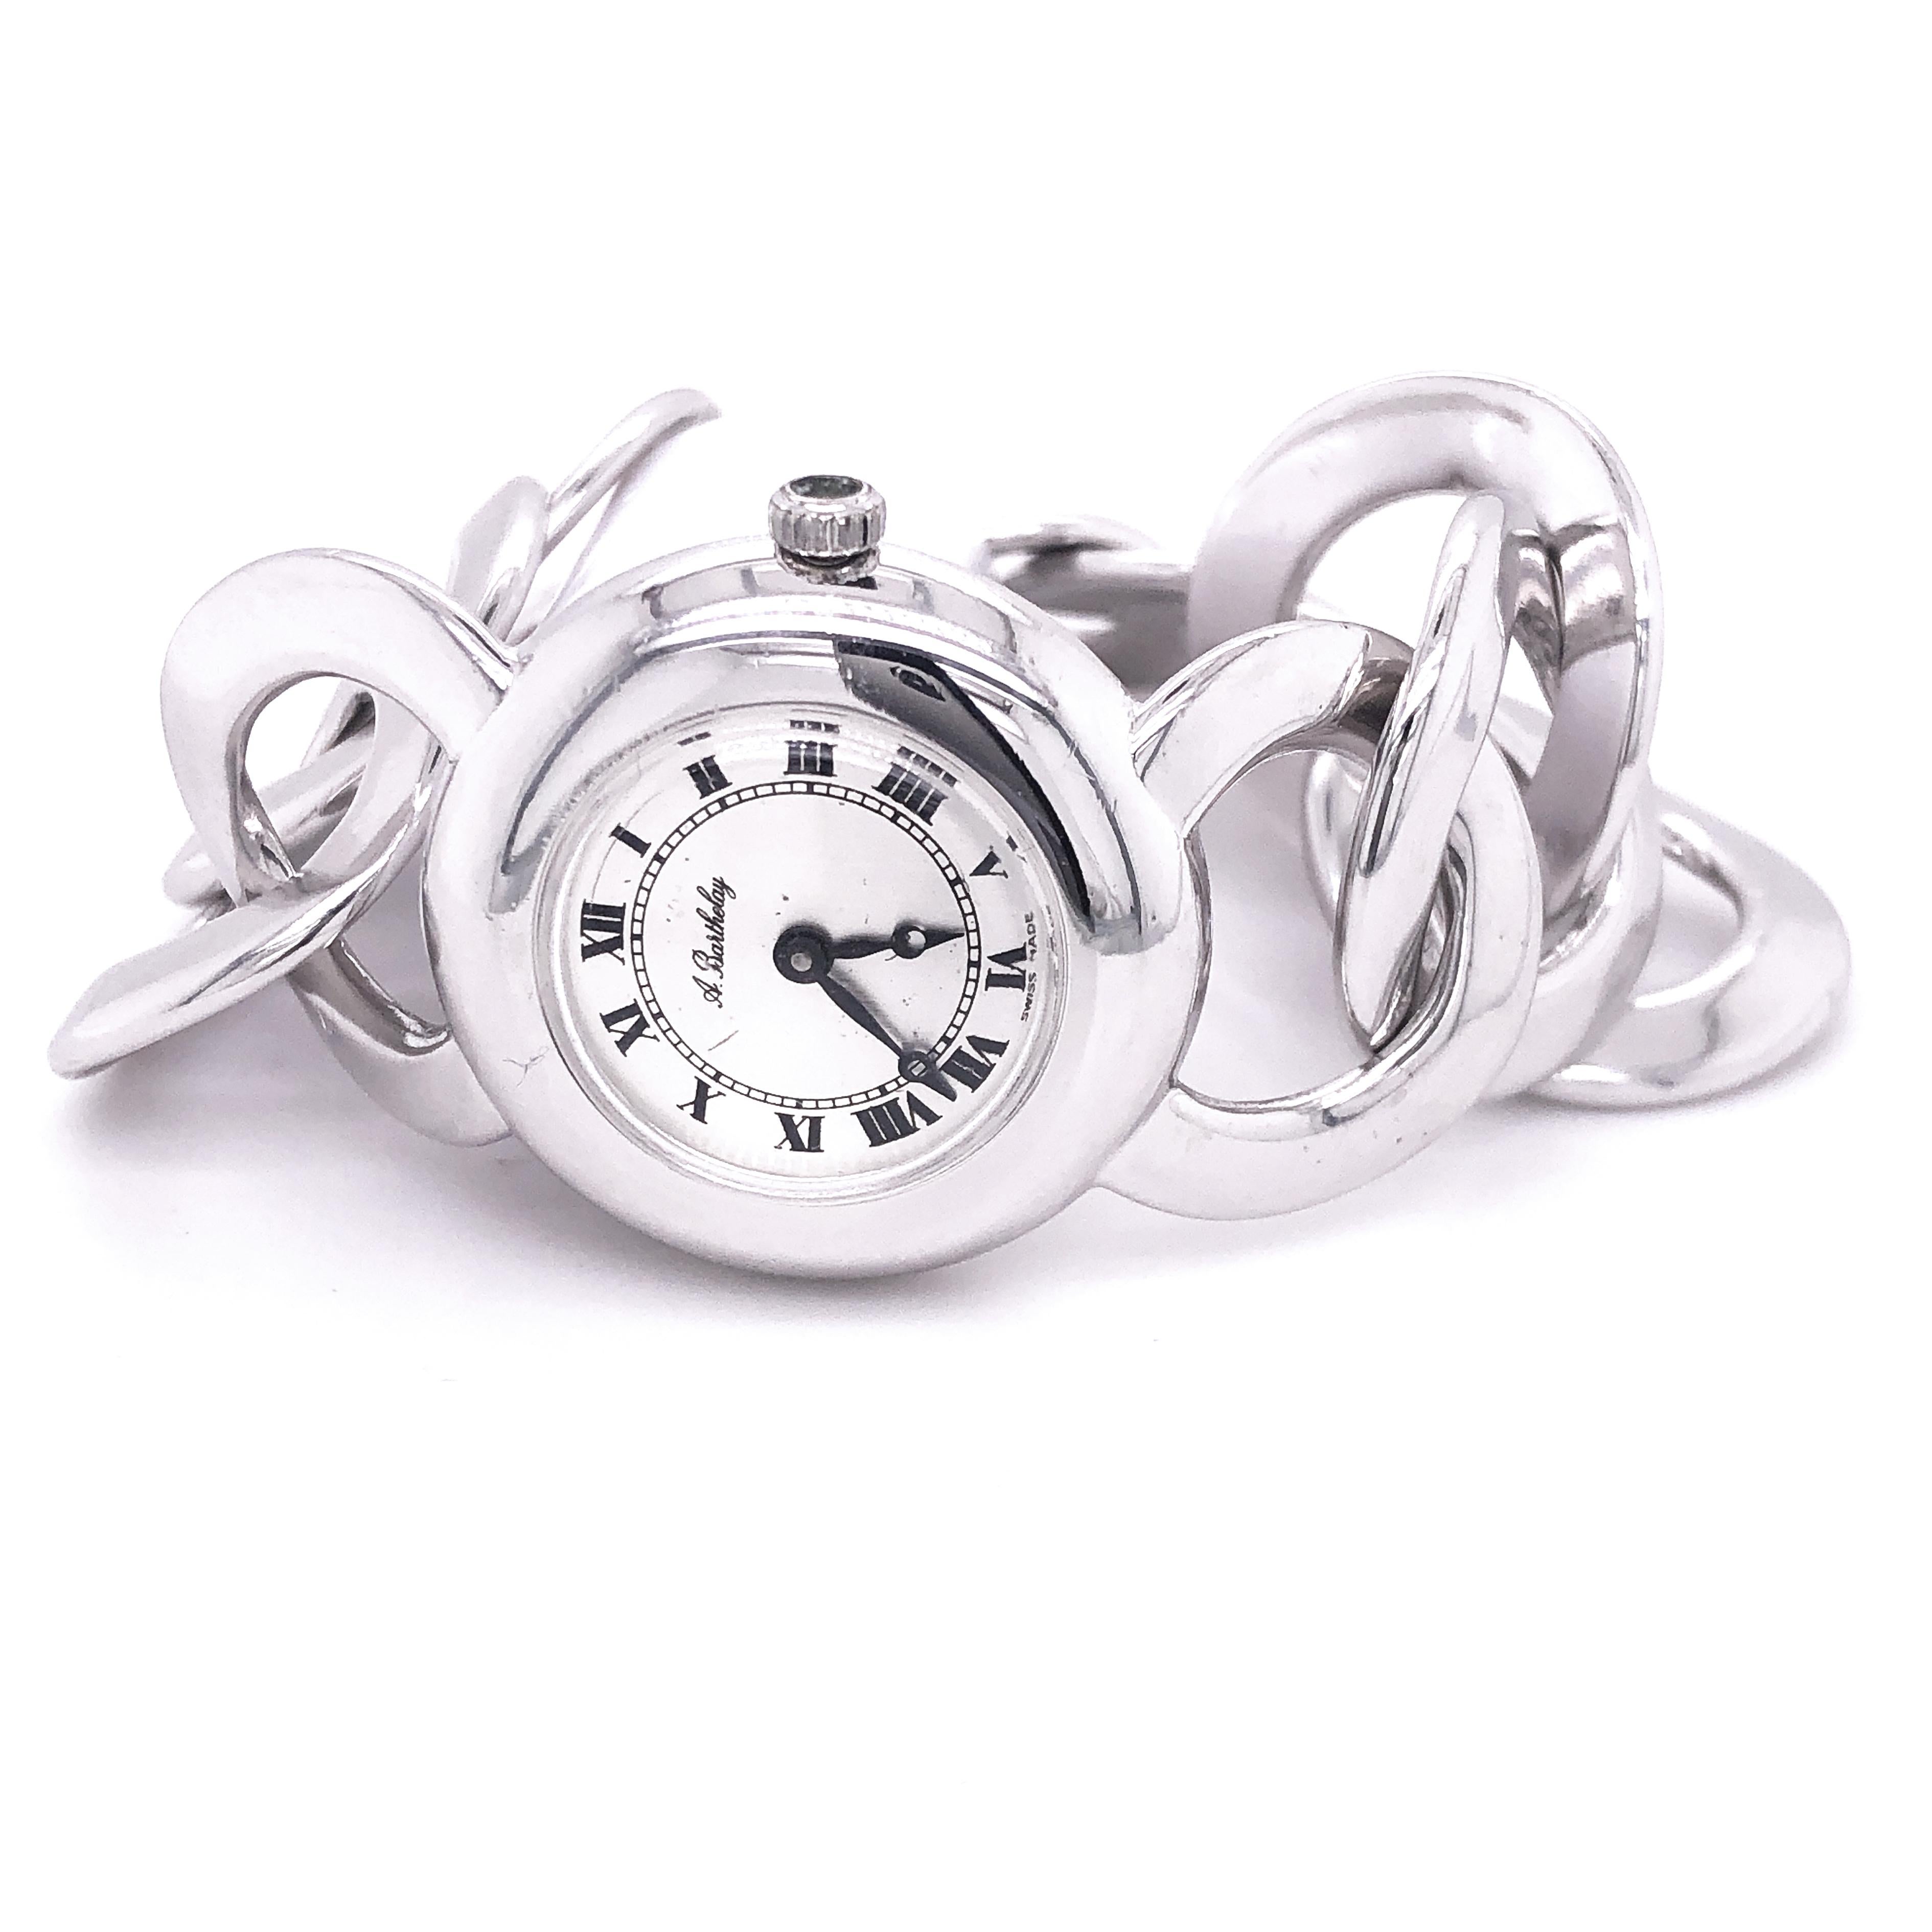 Women's or Men's Original 1960s Alexis Barthelay Manual-Winding Movement Solid Silver Watch